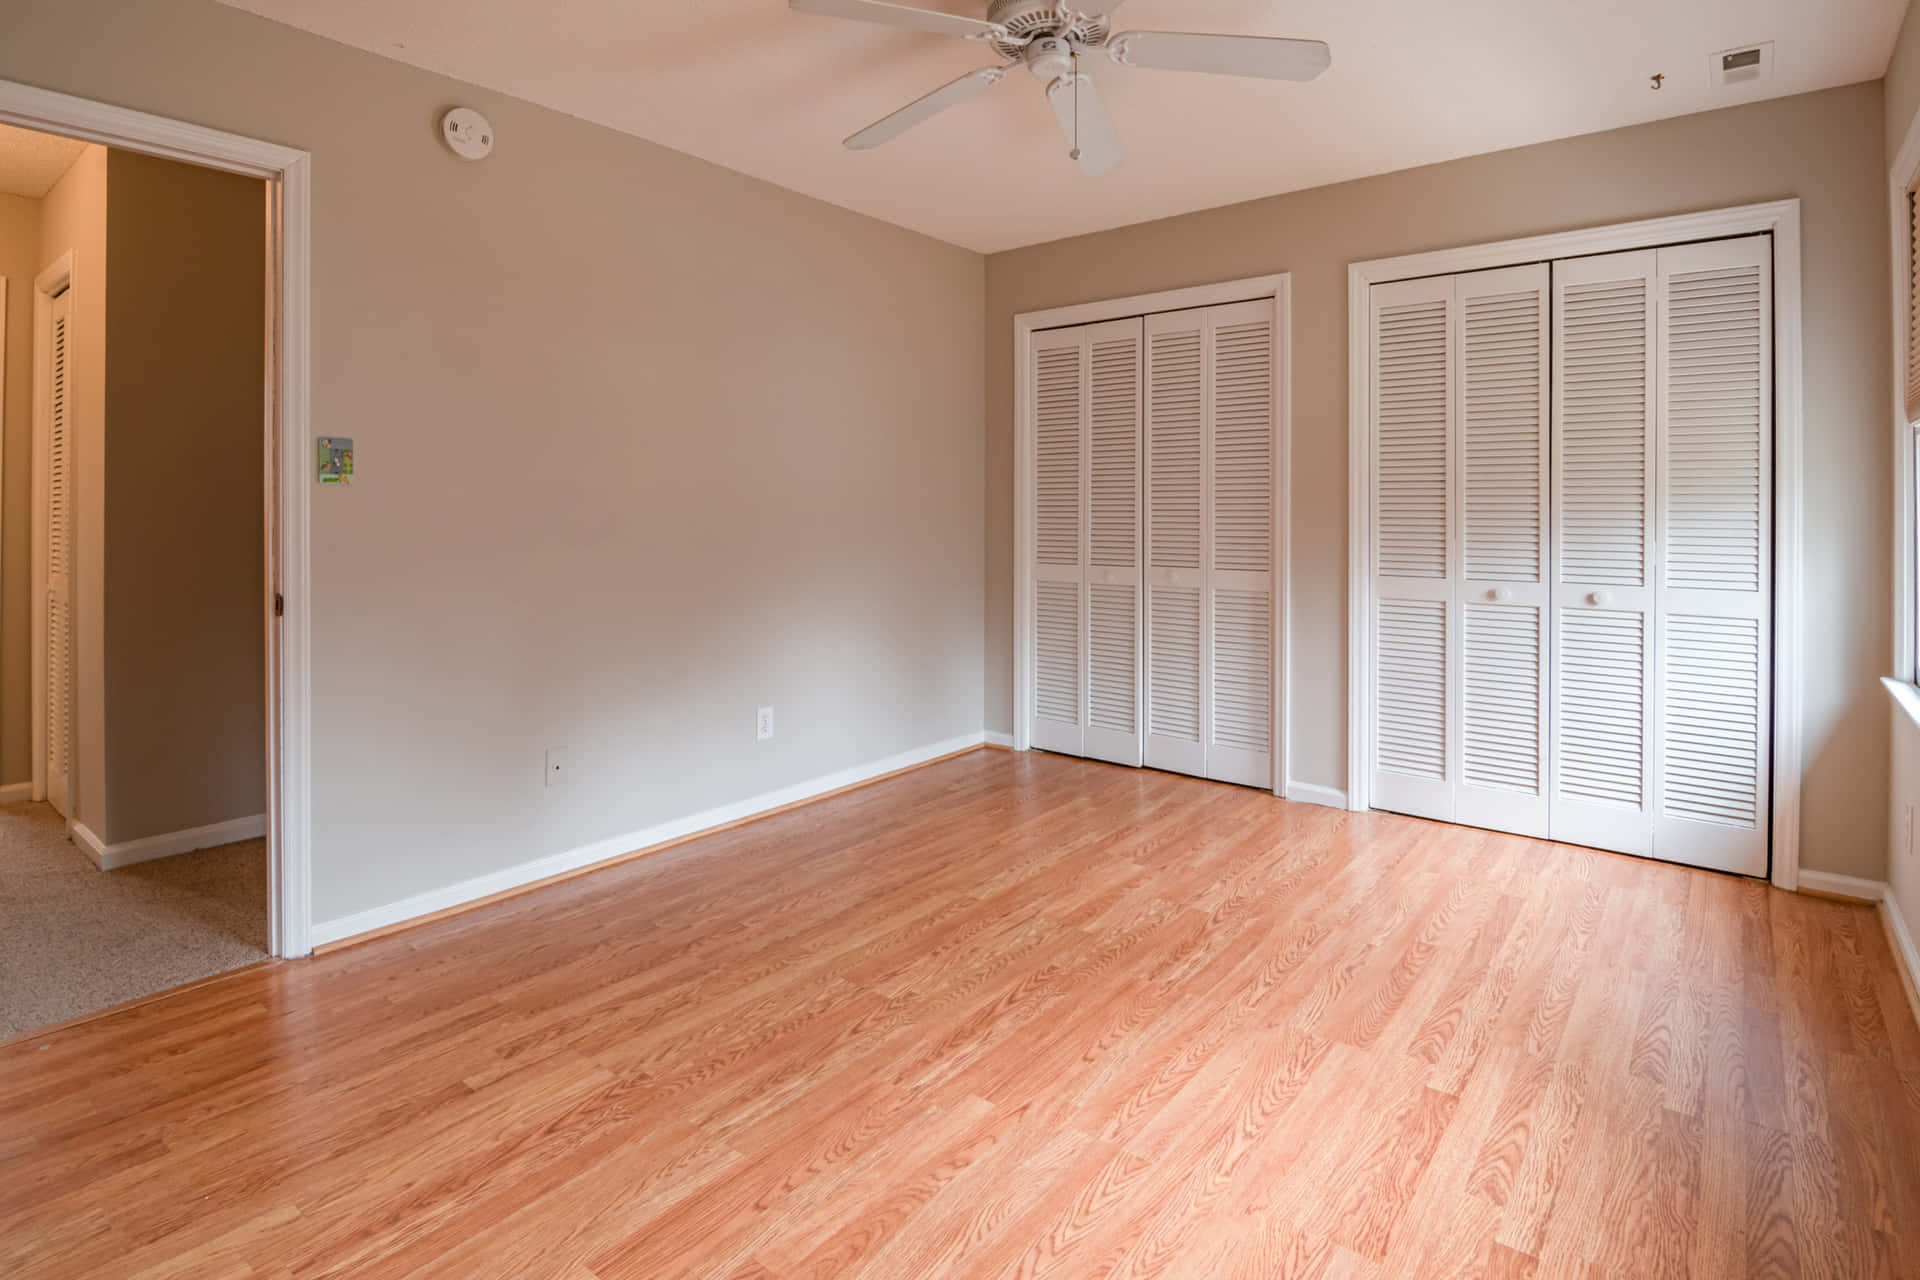 Empty Bedroom With Hardwood Floors And A Ceiling Fan